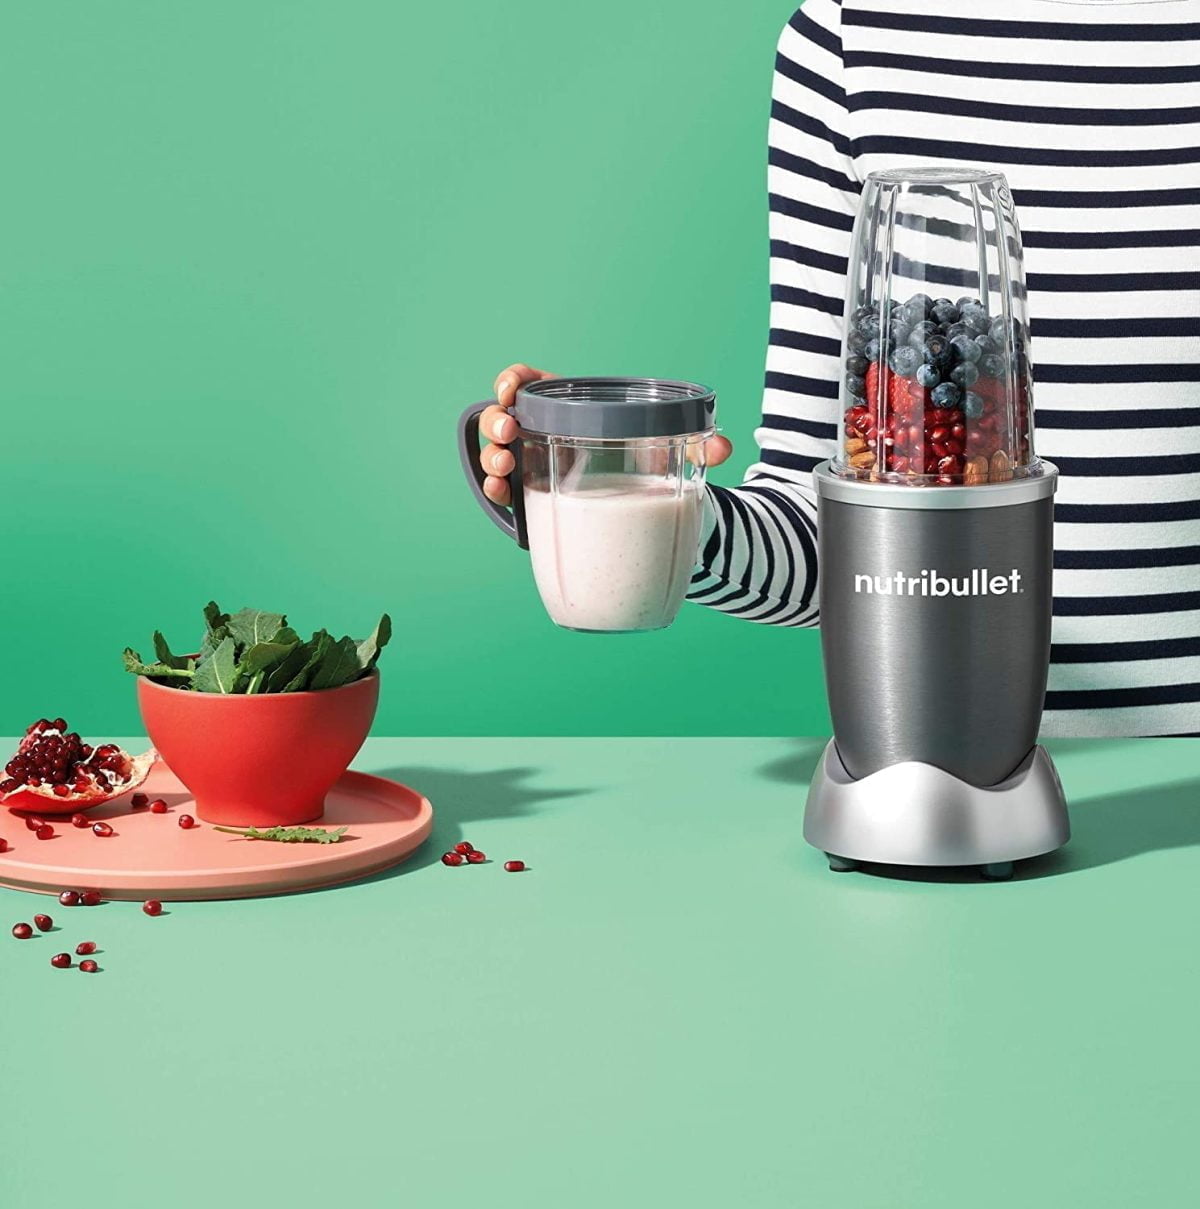 71S7Cp8Vabl. Ac Sl1500 &Lt;Ul Class=&Quot;A-Unordered-List A-Vertical A-Spacing-Mini&Quot;&Gt; &Lt;Li&Gt;&Lt;Span Class=&Quot;A-List-Item&Quot;&Gt;Meet The Most Popular Nutribullet, Our Compact-Yet-Powerful Personal Blender. You Choose What Goes In To Get The Most Out Of Every Ingredient, Every Day.&Lt;/Span&Gt;&Lt;/Li&Gt; &Lt;Li&Gt;&Lt;Span Class=&Quot;A-List-Item&Quot;&Gt;The Nutribullet Is The Fastest, Easiest Solution For Making Nutrient-Packed Smoothies. Load It Up With Your Favorite Whole Foods Like Nuts, Berries, And Spinach, Then Push, Twist, And Blend Your Way To A Healthier Lifestyle.&Lt;/Span&Gt;&Lt;/Li&Gt; &Lt;Li&Gt;&Lt;Span Class=&Quot;A-List-Item&Quot;&Gt;Powerful 600-Watt Motor And Refined Nutrient-Extraction Blades Blend Whole Foods Into Liquid Fuel For Your Body - In Seconds.&Lt;/Span&Gt;&Lt;/Li&Gt; &Lt;Li&Gt;&Lt;Span Class=&Quot;A-List-Item&Quot;&Gt;Hassle-Free Cleaning - Simply Twist Off The Blade, Rinse With Soap And Water, And Put The Cups In The Top Rack Of The Dishwasher.&Lt;/Span&Gt;&Lt;/Li&Gt; &Lt;Li&Gt;&Lt;Span Class=&Quot;A-List-Item&Quot;&Gt;What You Get: (1) 600 Watt Motor Base, (1) Extractor Blade, (1) 700Ml Cup, (1) 500Ml Cup, (1) Lip Ring With Handle, (1) Solid Lid, (1) User Guide, (1) Recipe Book. 2 Years Brand Warranty&Lt;/Span&Gt;&Lt;/Li&Gt; &Lt;/Ul&Gt; Nutribullet Nutribullet 600 Watts, 8 Piece Set, Multi-Function High Speed Blender, Mixer System With Nutrient Extractor, Smoothie Maker, Gray